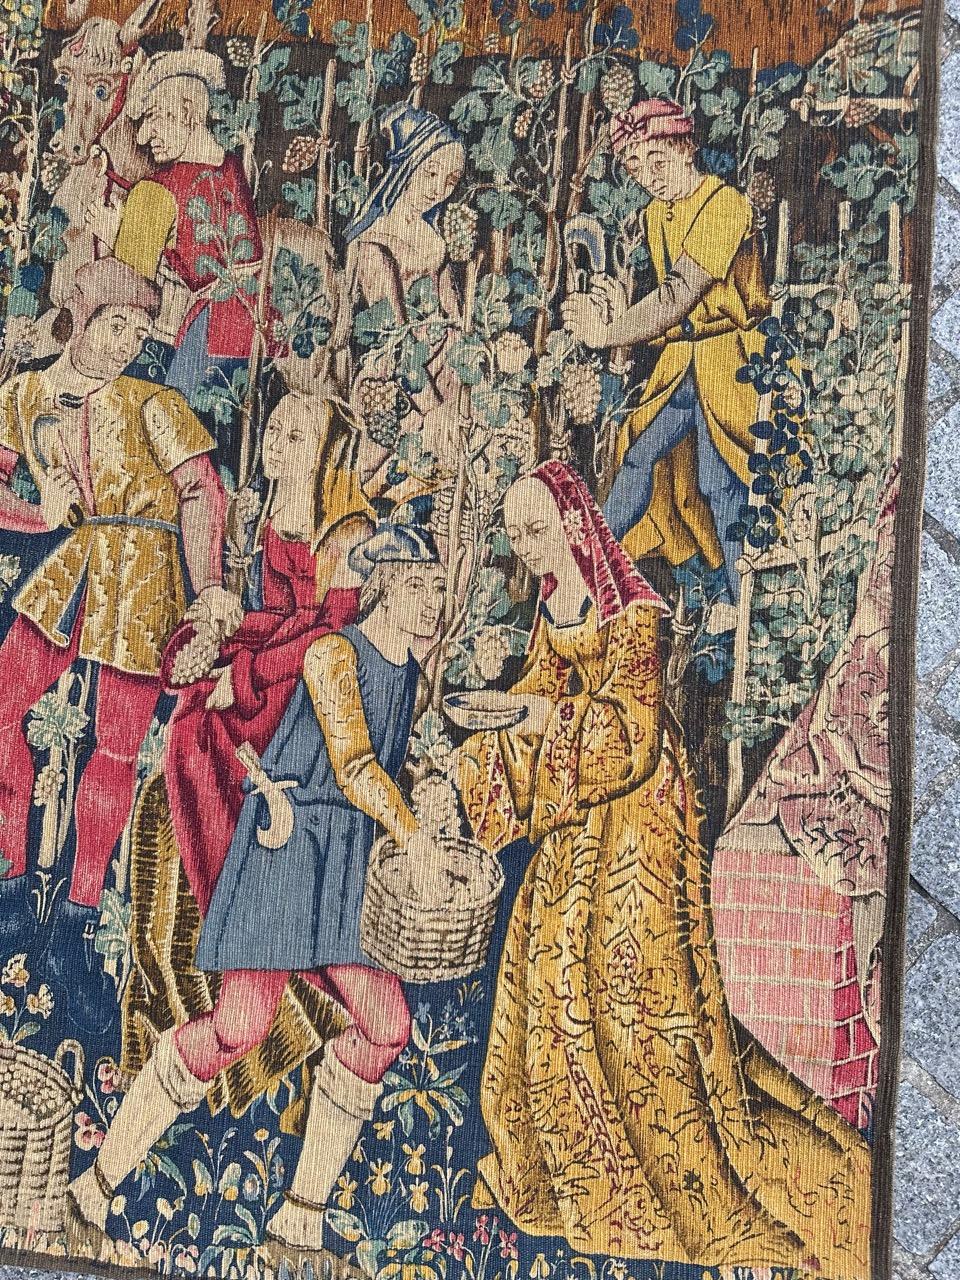 Discover the elegance of this mid-century French hand-printed tapestry featuring the exquisite design of the renowned medieval museum tapestry, 